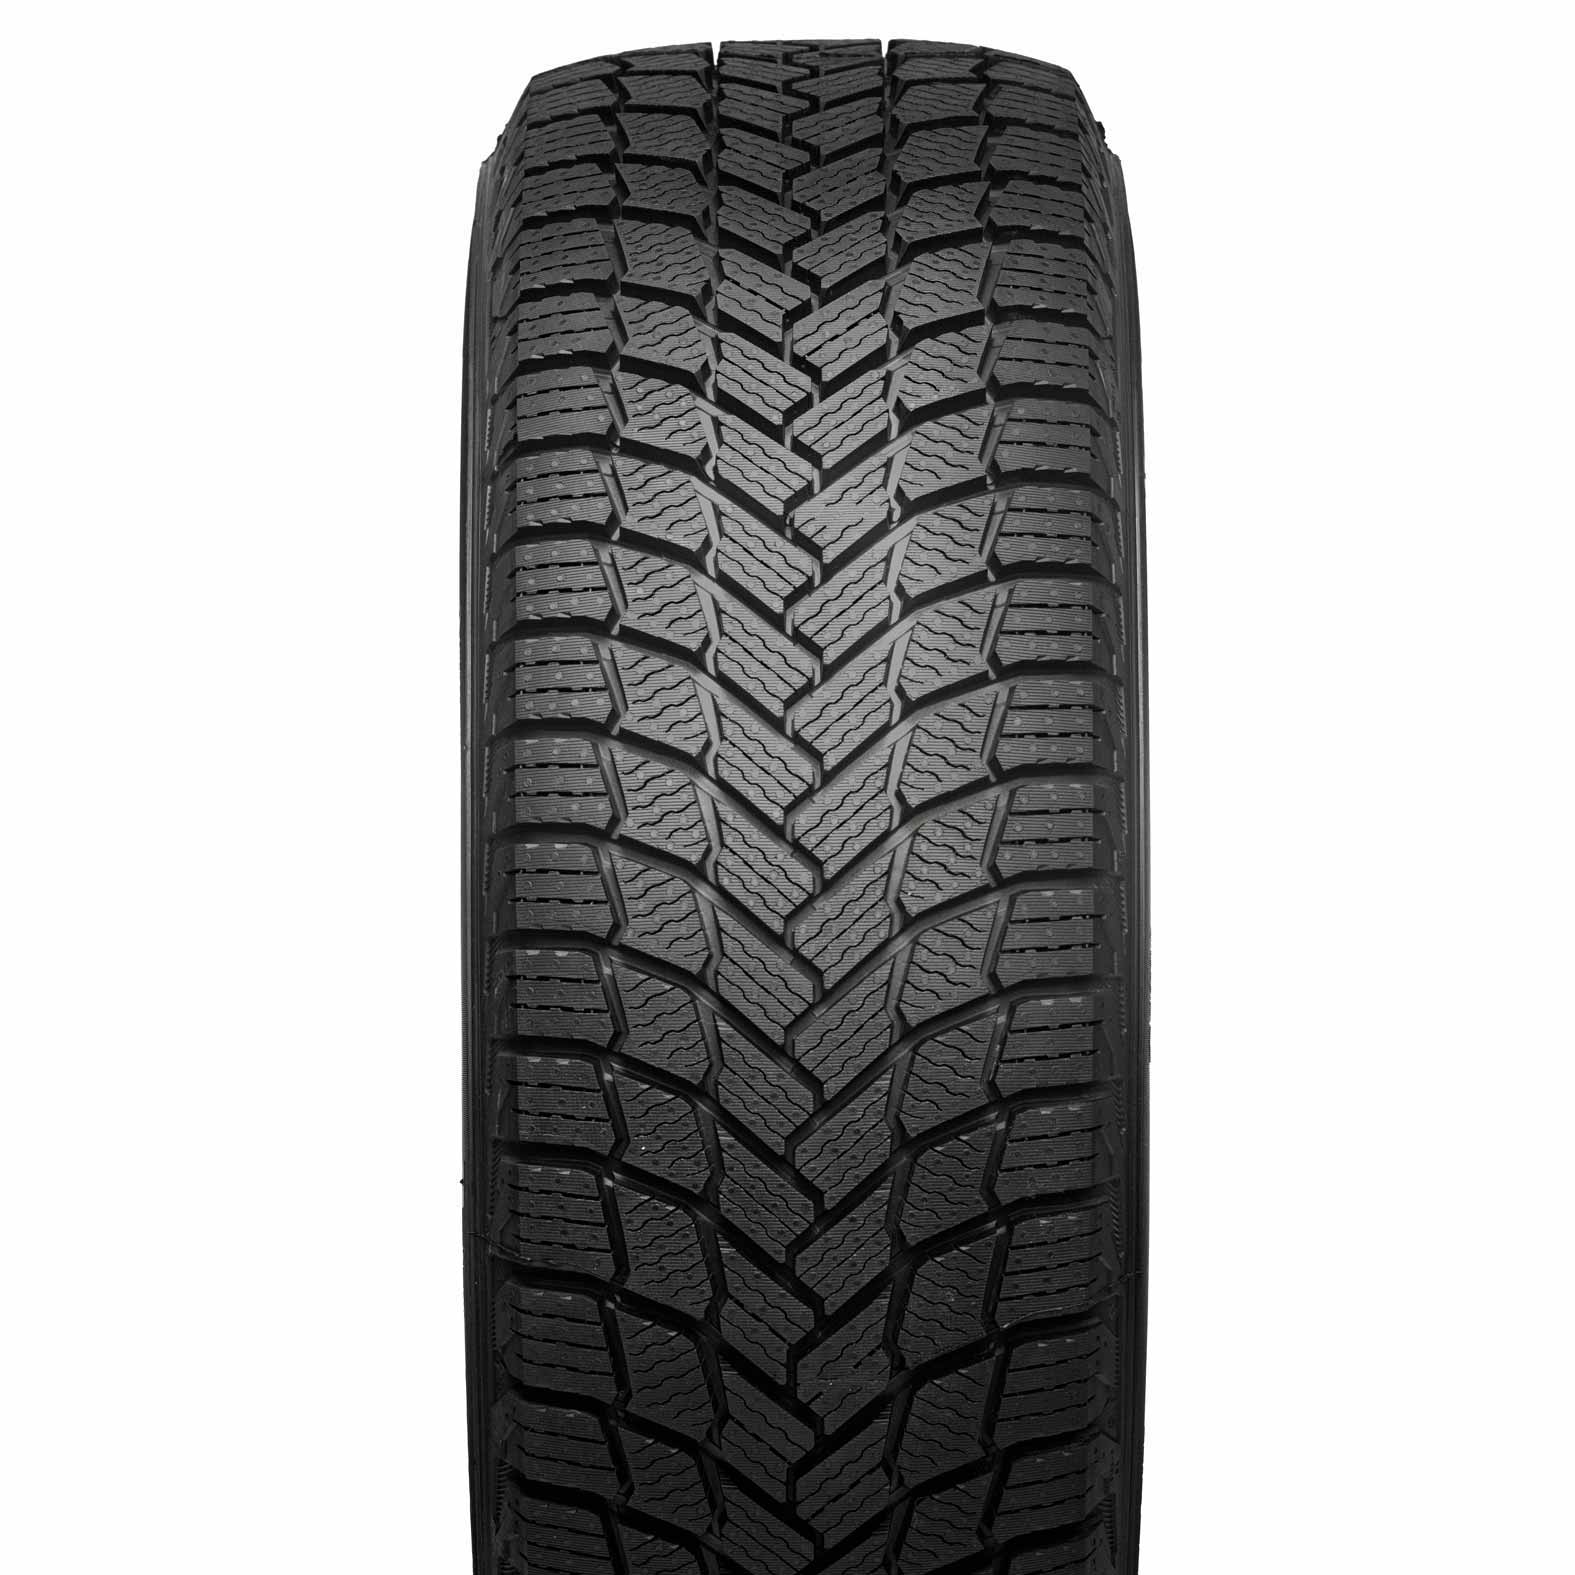 X-Ice | Snow Tire Winter Tire for Kal Michelin